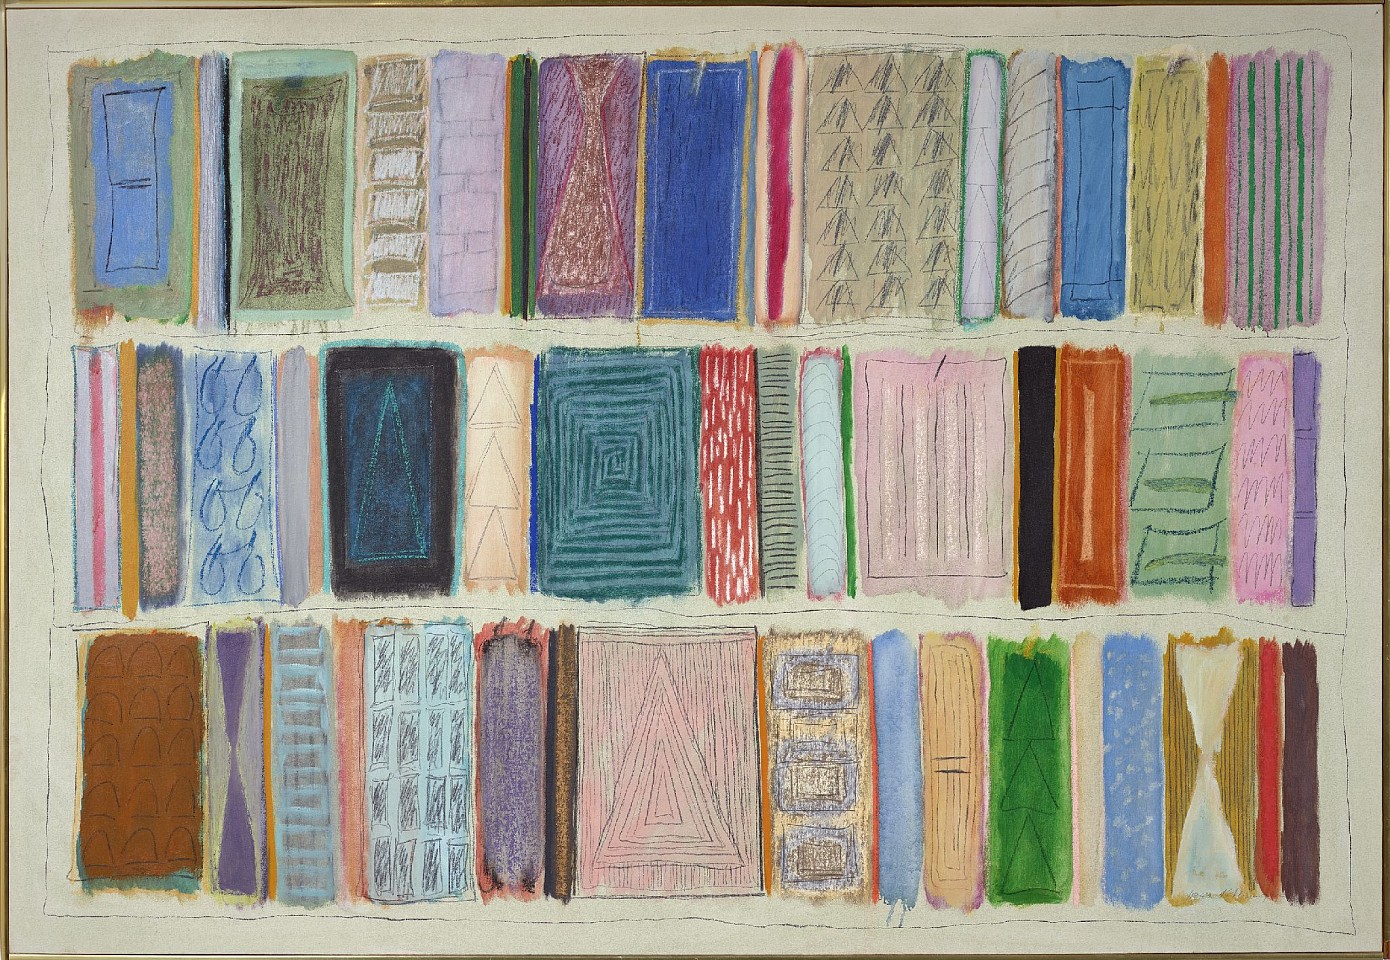 Ida Kohlmeyer, Color Stripes | SOLD, 1980
Mixed media on canvas, 49 x 71 1/2 in. (124.5 x 181.6 cm)
KOH-00025